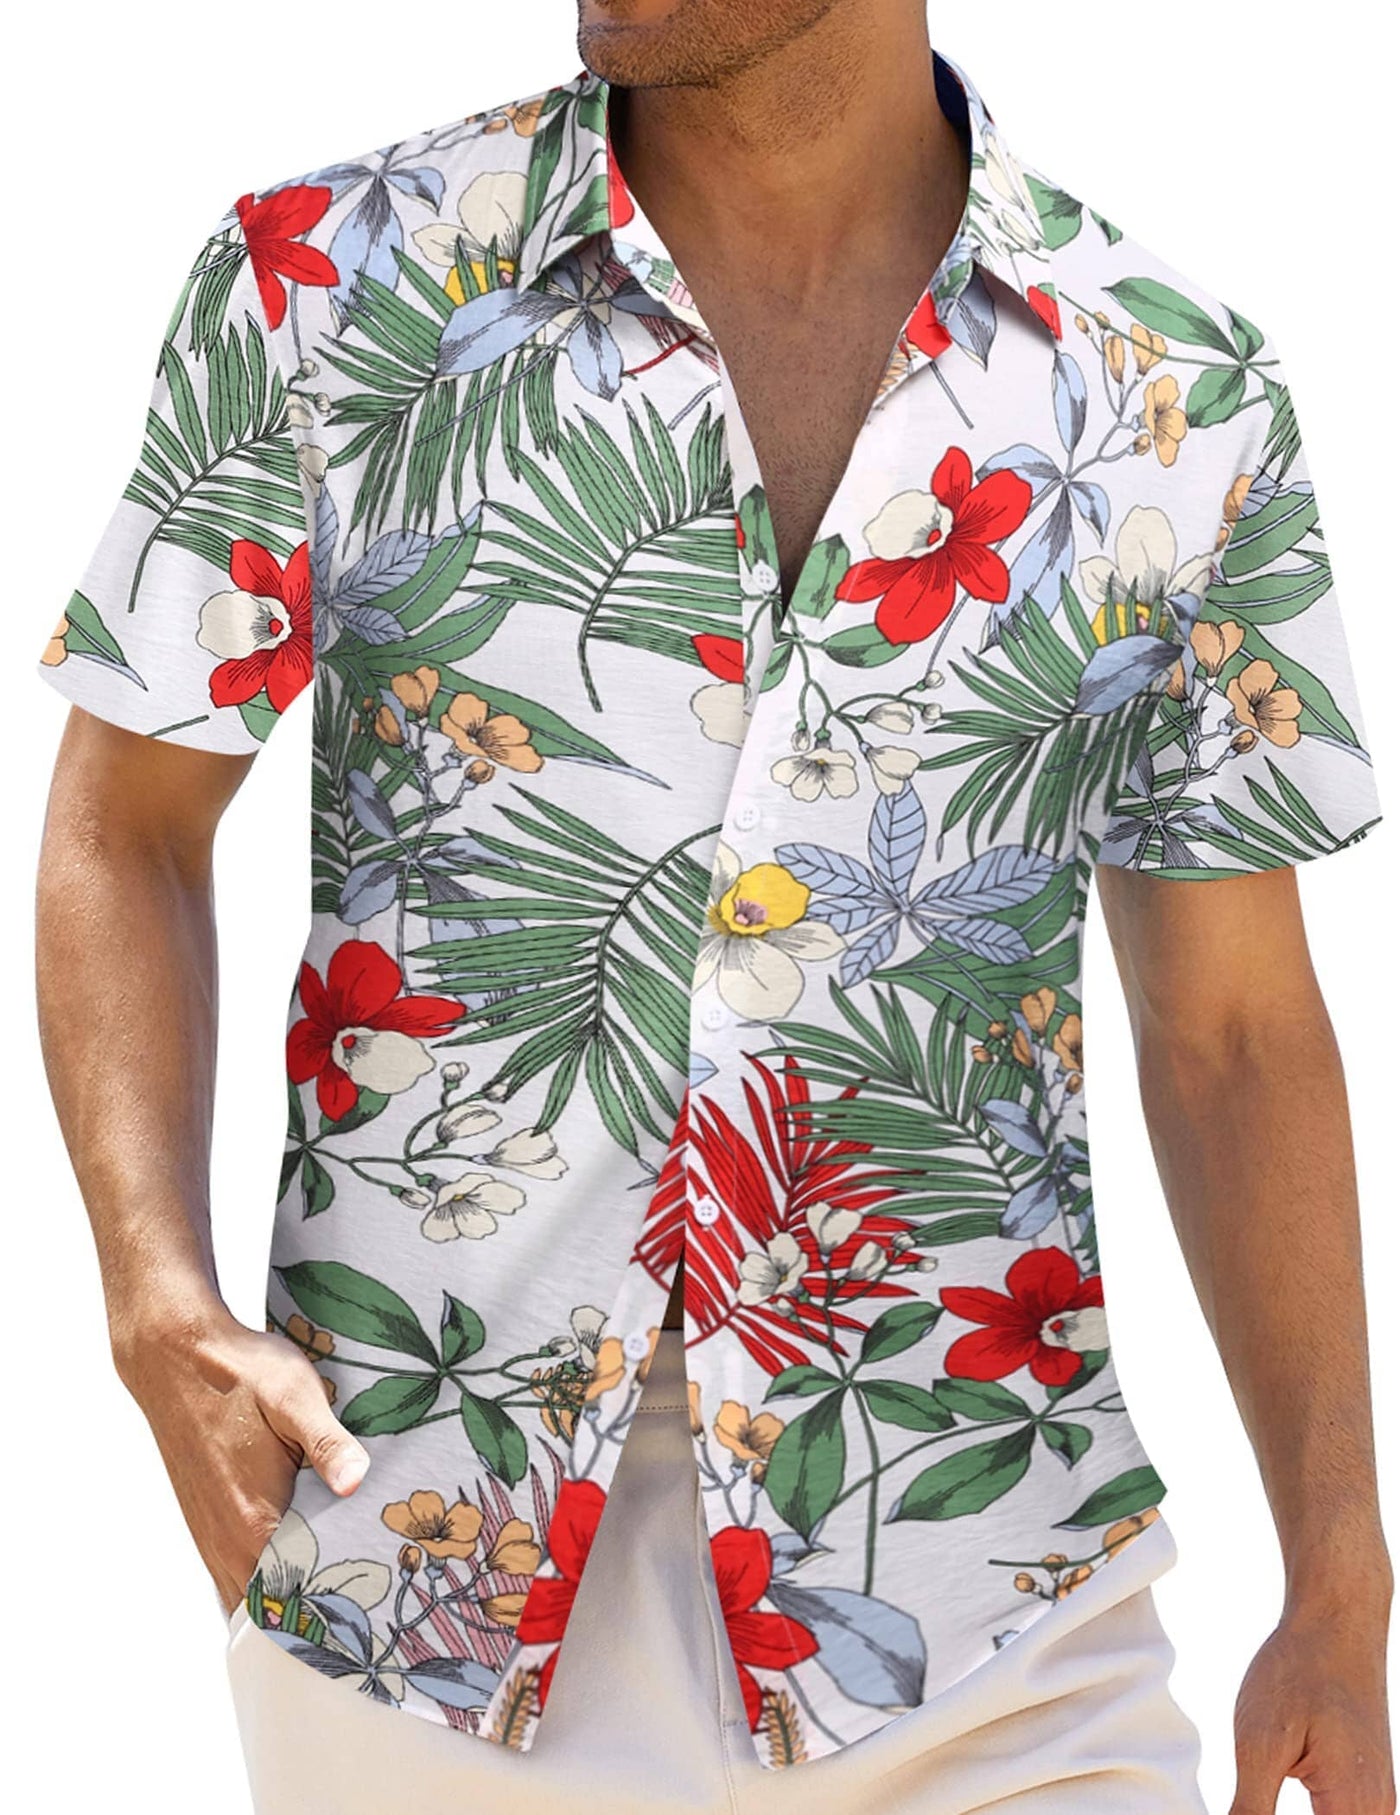 Coofandy Hawaiian Floral Shirt (US Only) Shirts coofandy White Floral S 